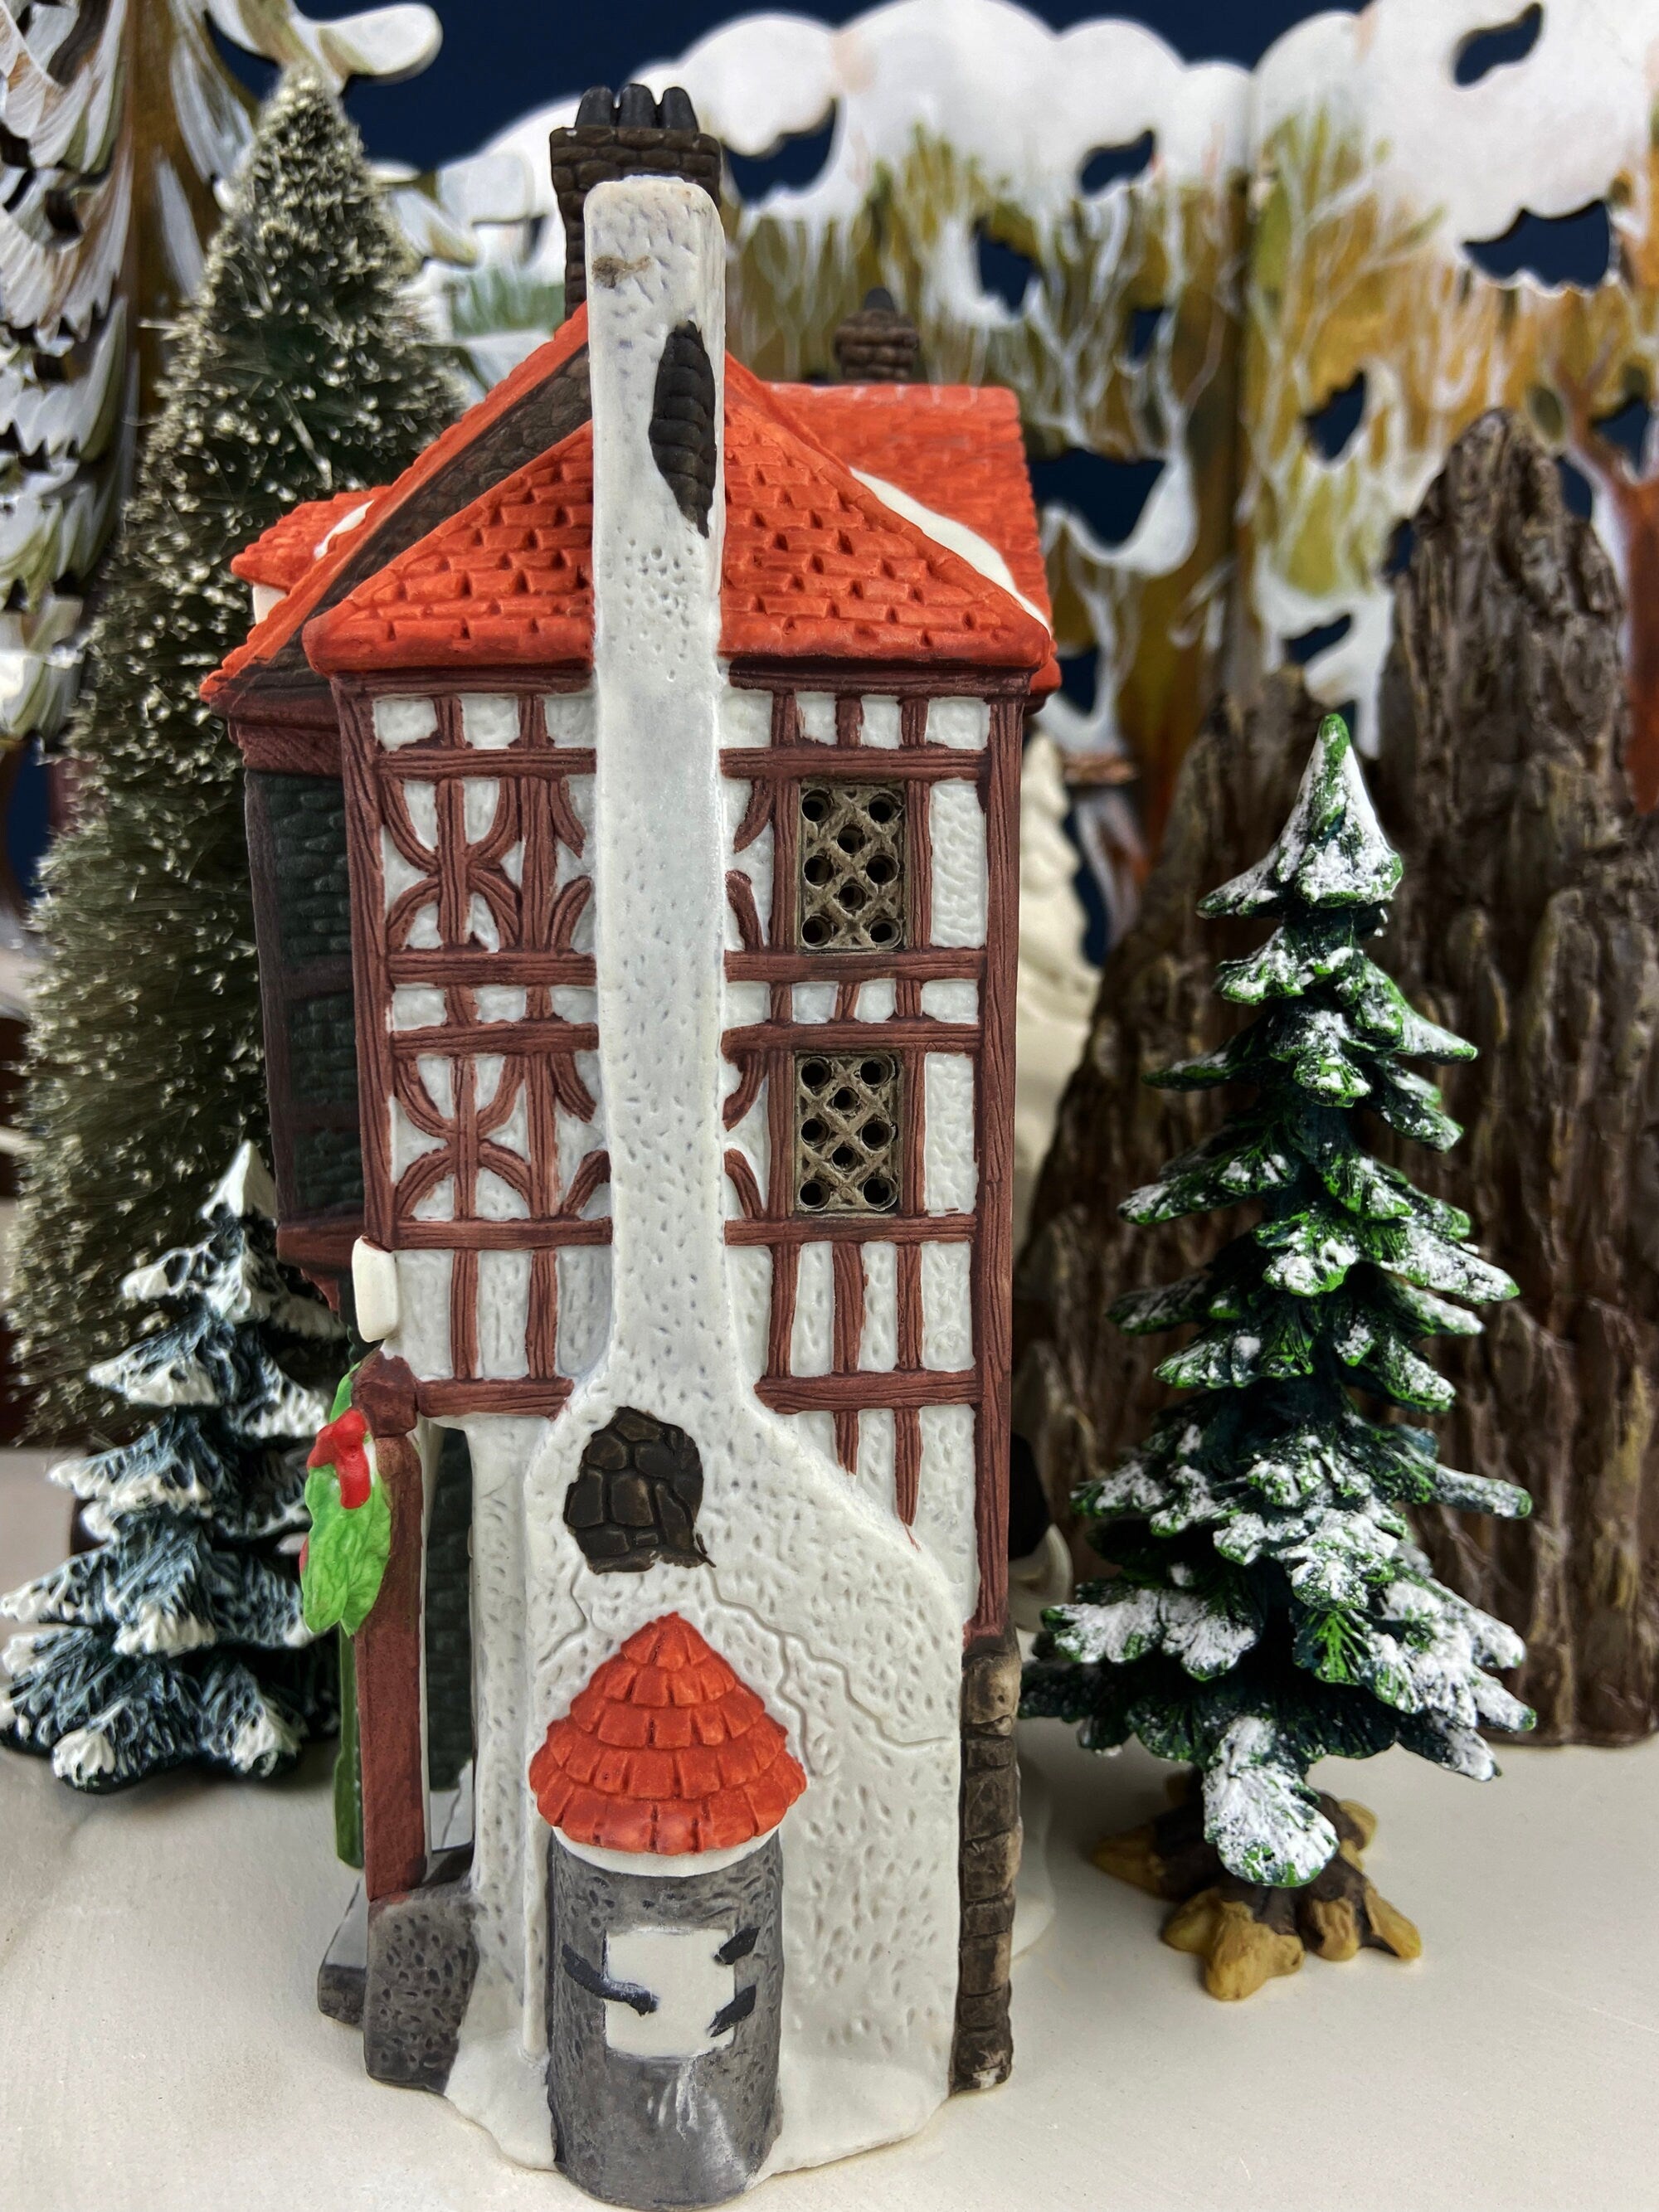 Christmas Village House by Dept 56. Illuminated Public House. Sweets. –  Anything Discovered